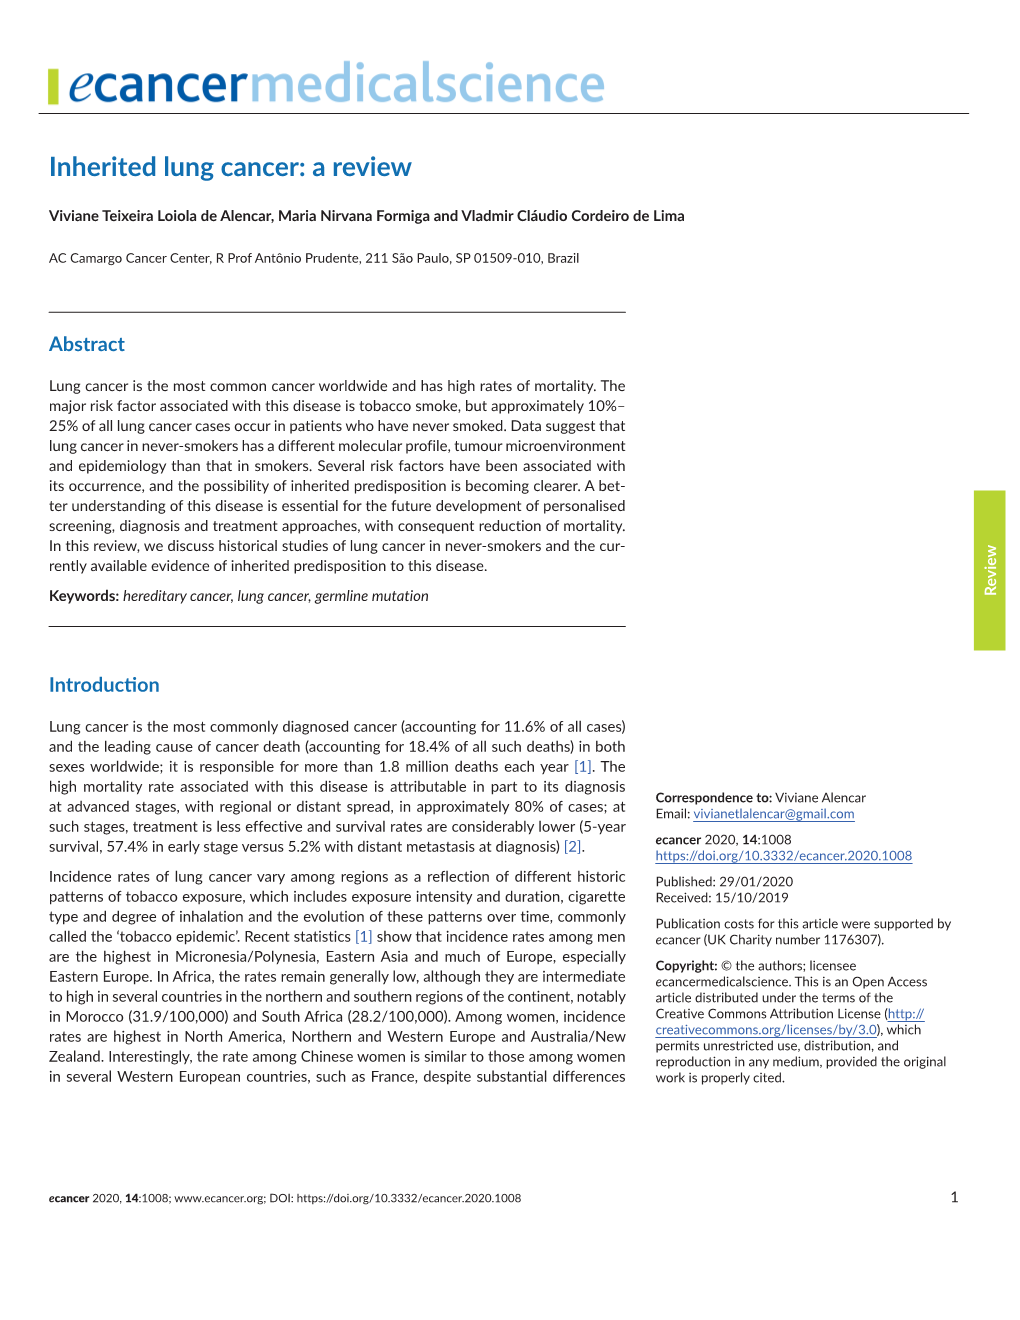 Inherited Lung Cancer: a Review